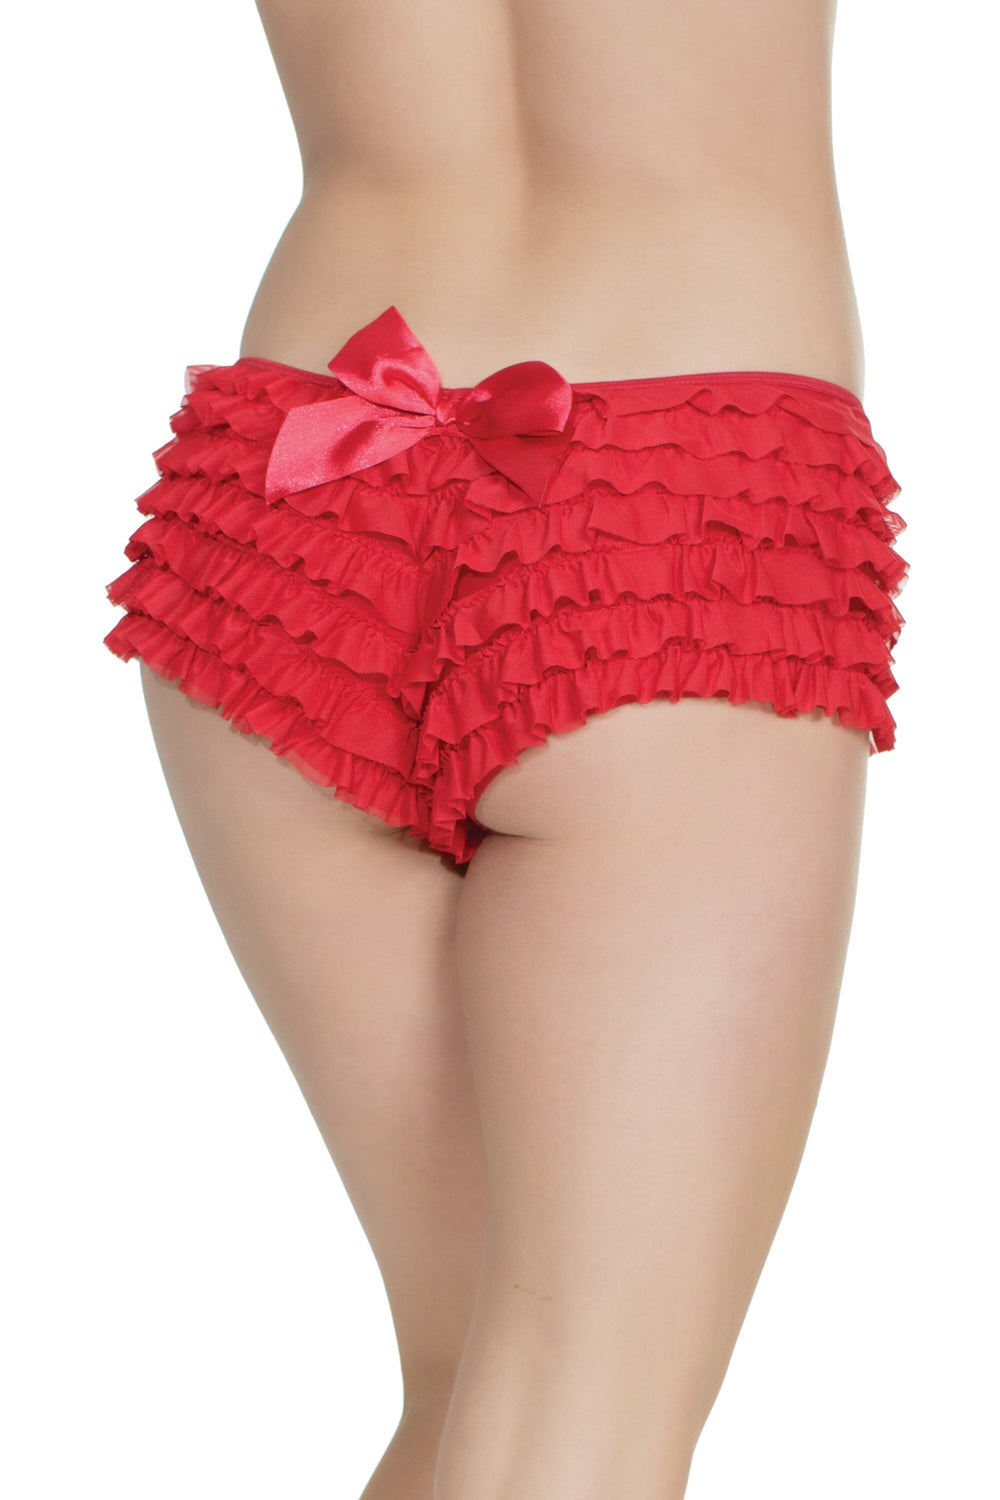 Red Ruffle Shorts-Booty Shorts-Coquette-Red-O/S-SEXYSHOES.COM